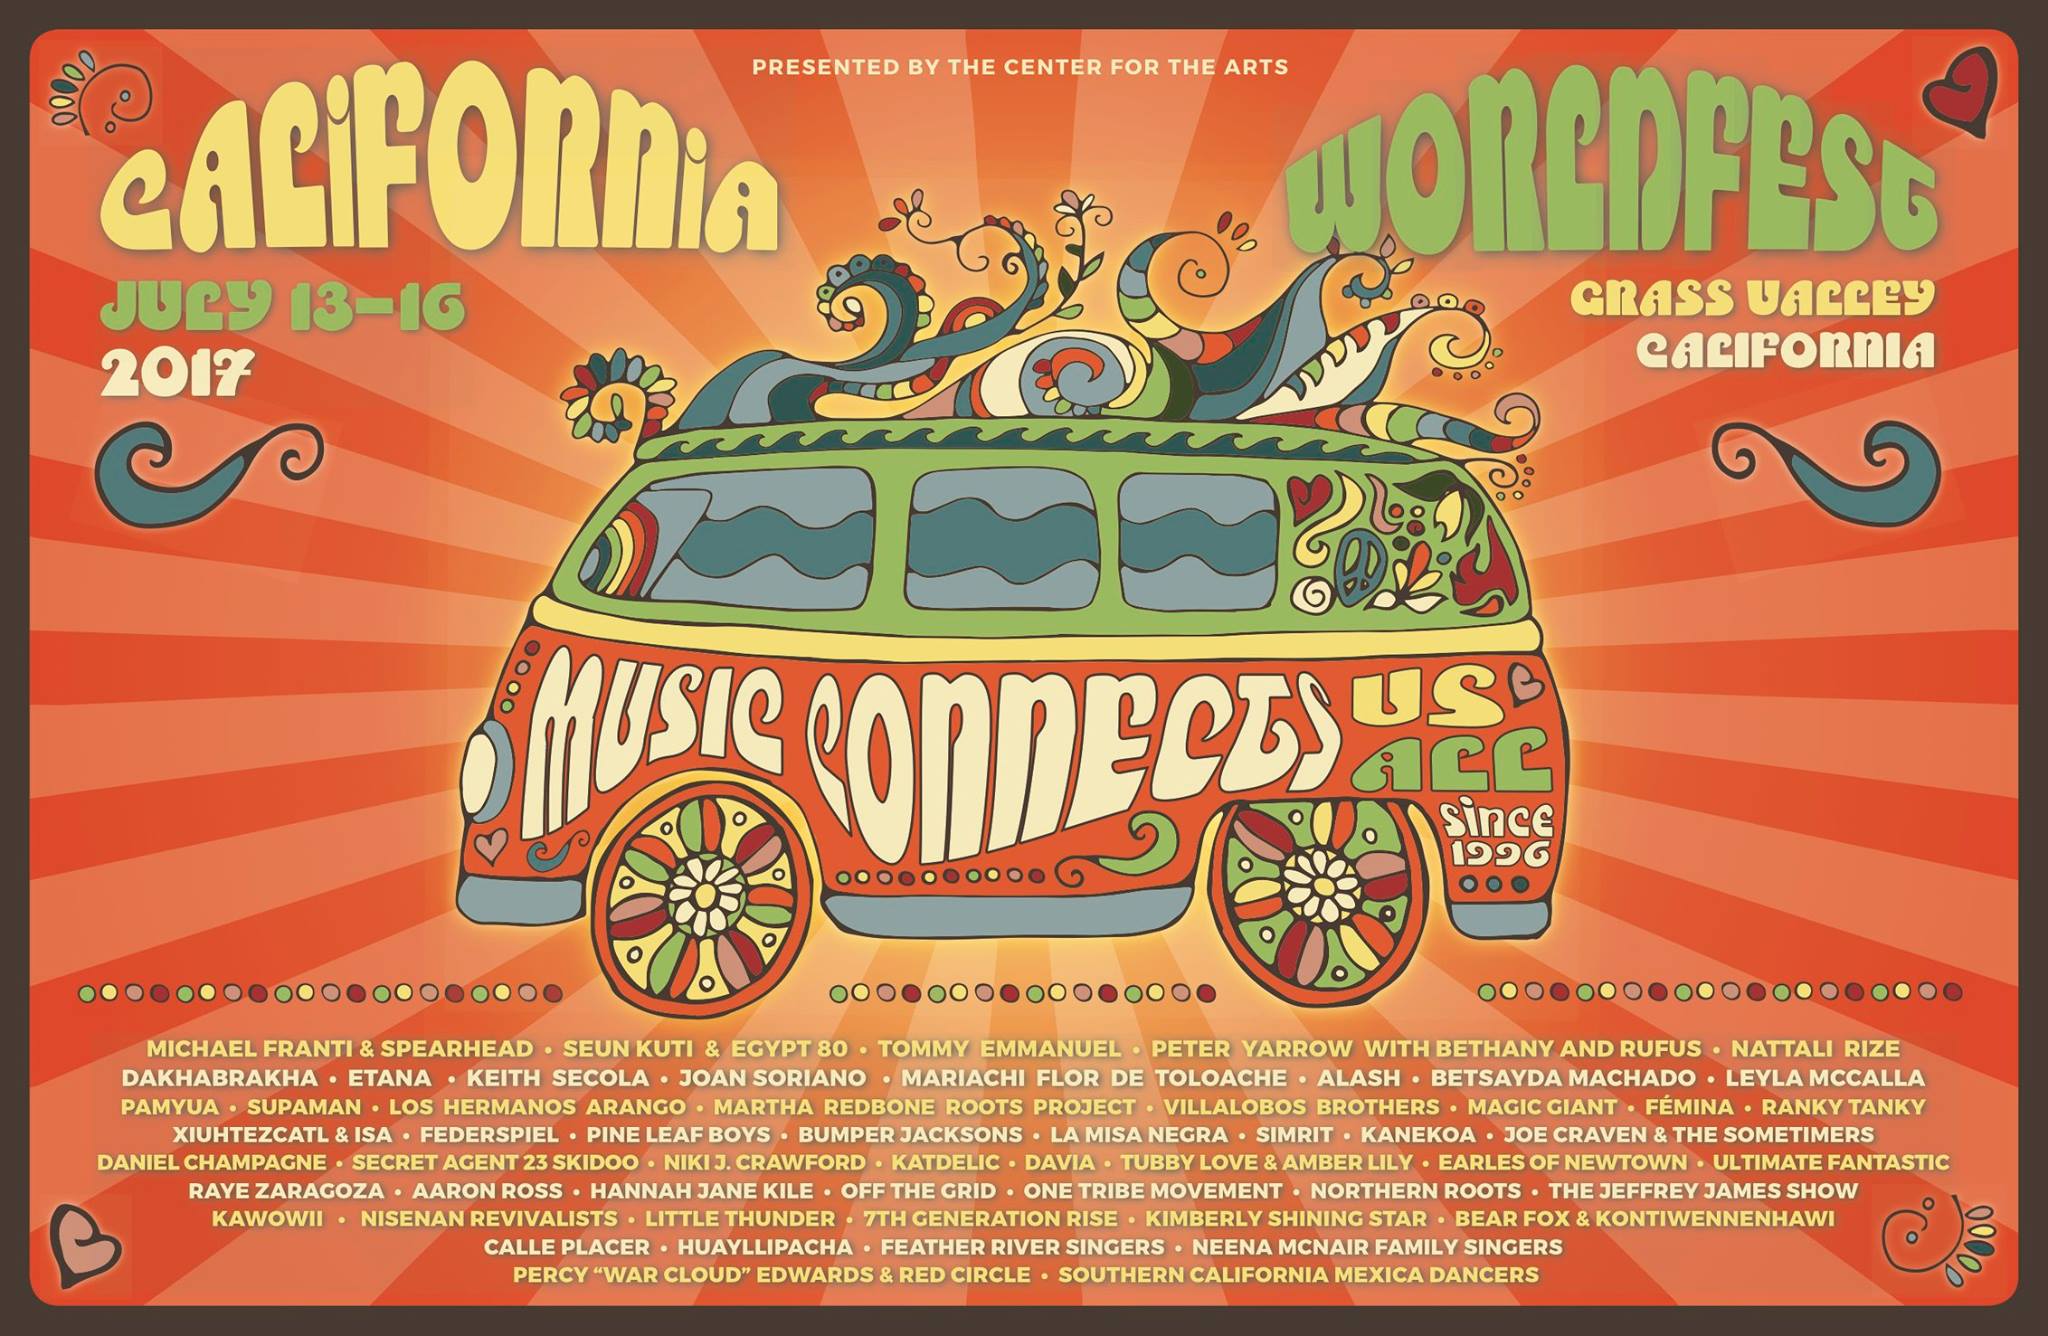 CALIFORNIA WORLDFEST IS COMING UP ON JULY 13TH 16TH Strawberry Music